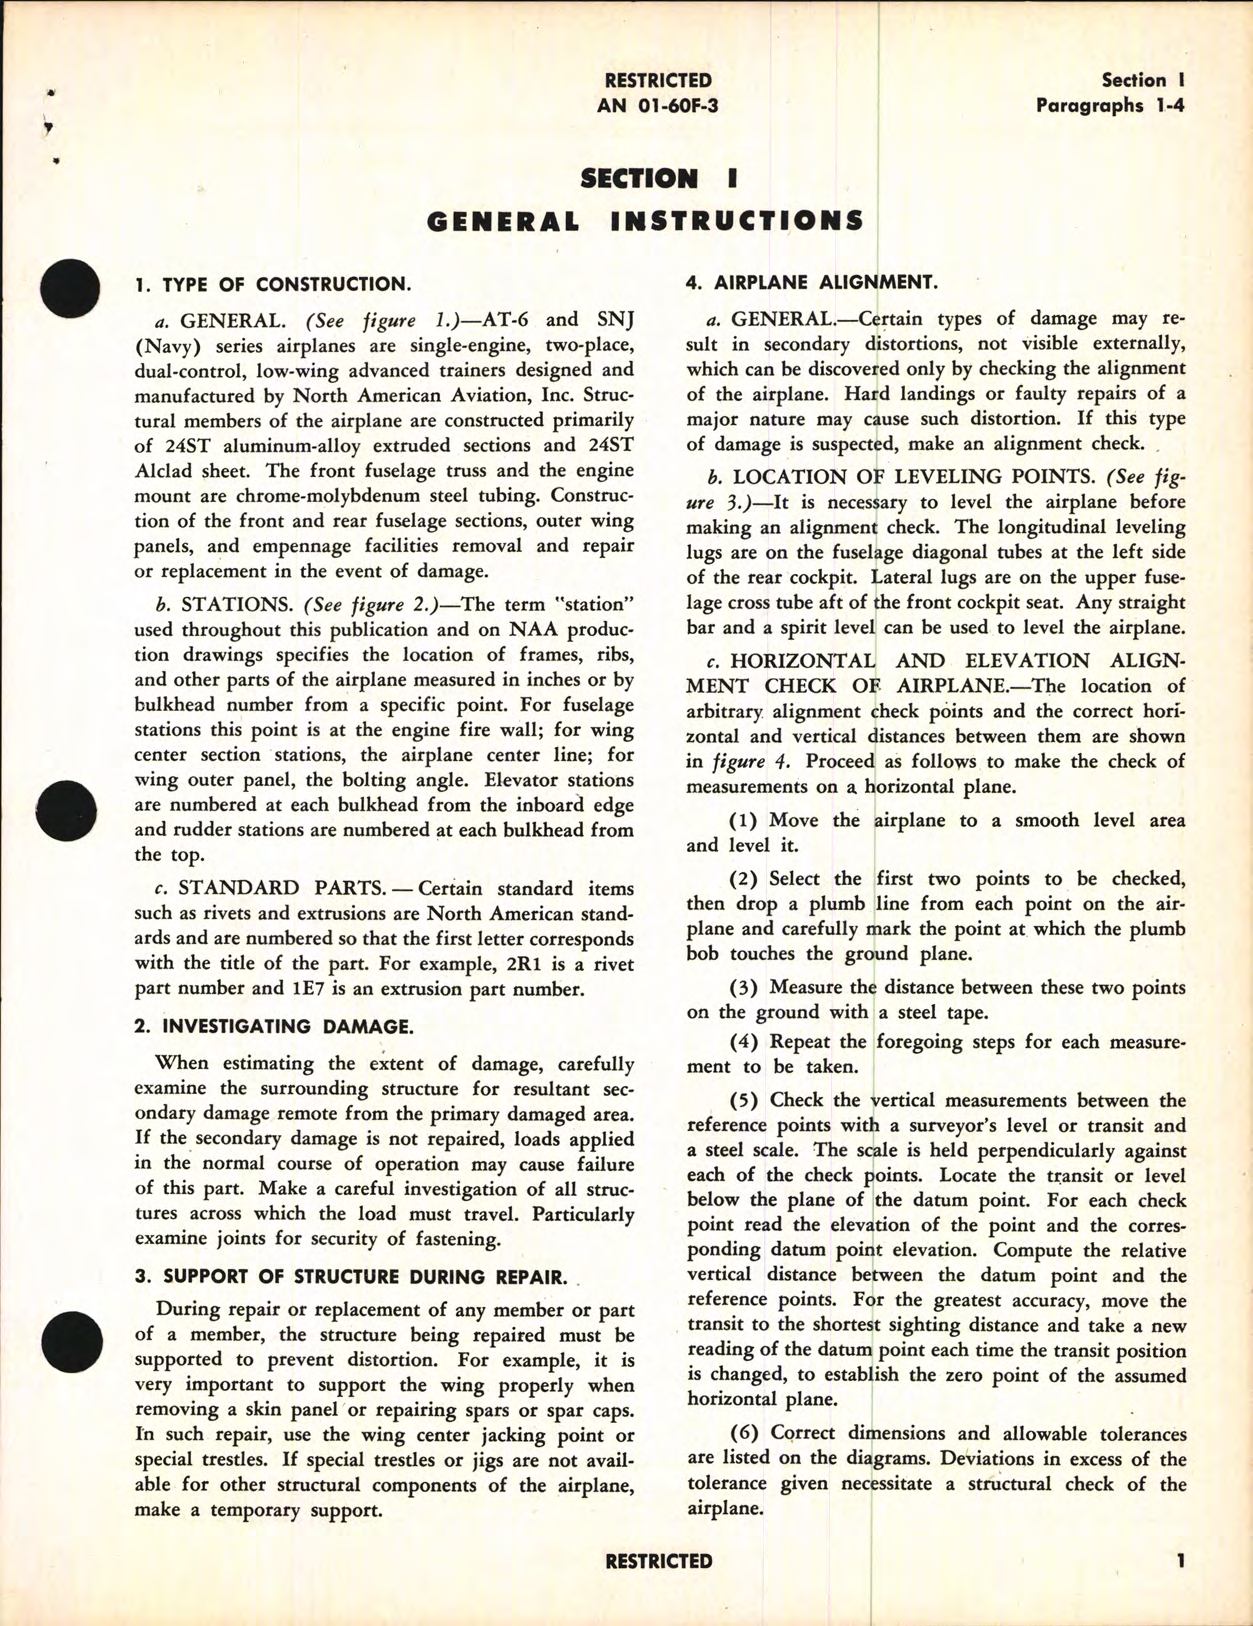 Sample page 7 from AirCorps Library document: Structural Repair Instructions for AT-6 and SNJ Series (Harvard IIA and III)